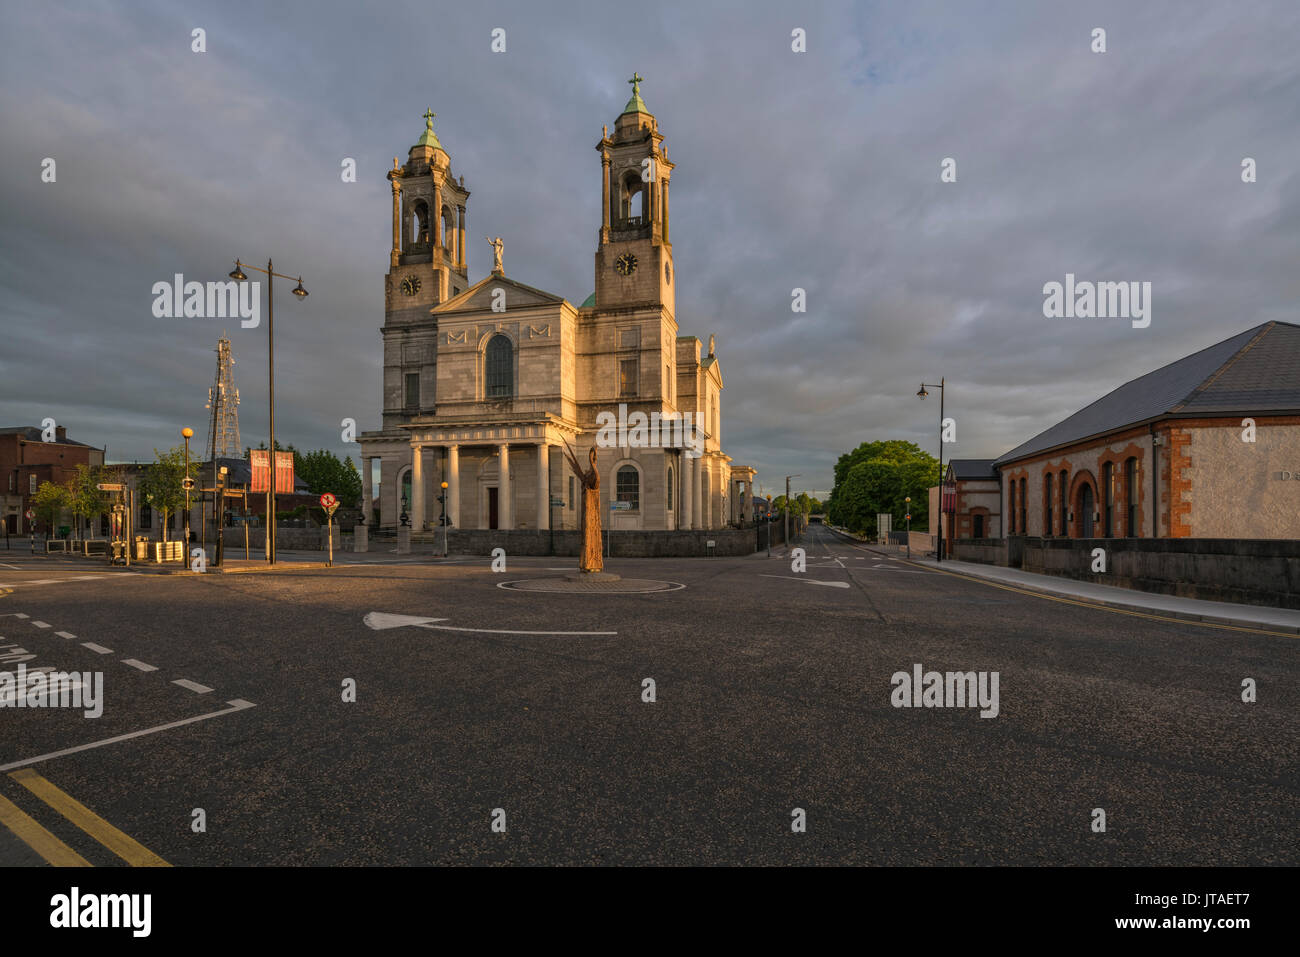 Athlone, Church of Saints Peter and Paul, County Westmeath, Leinster, Republic of Ireland, Europe Stock Photo